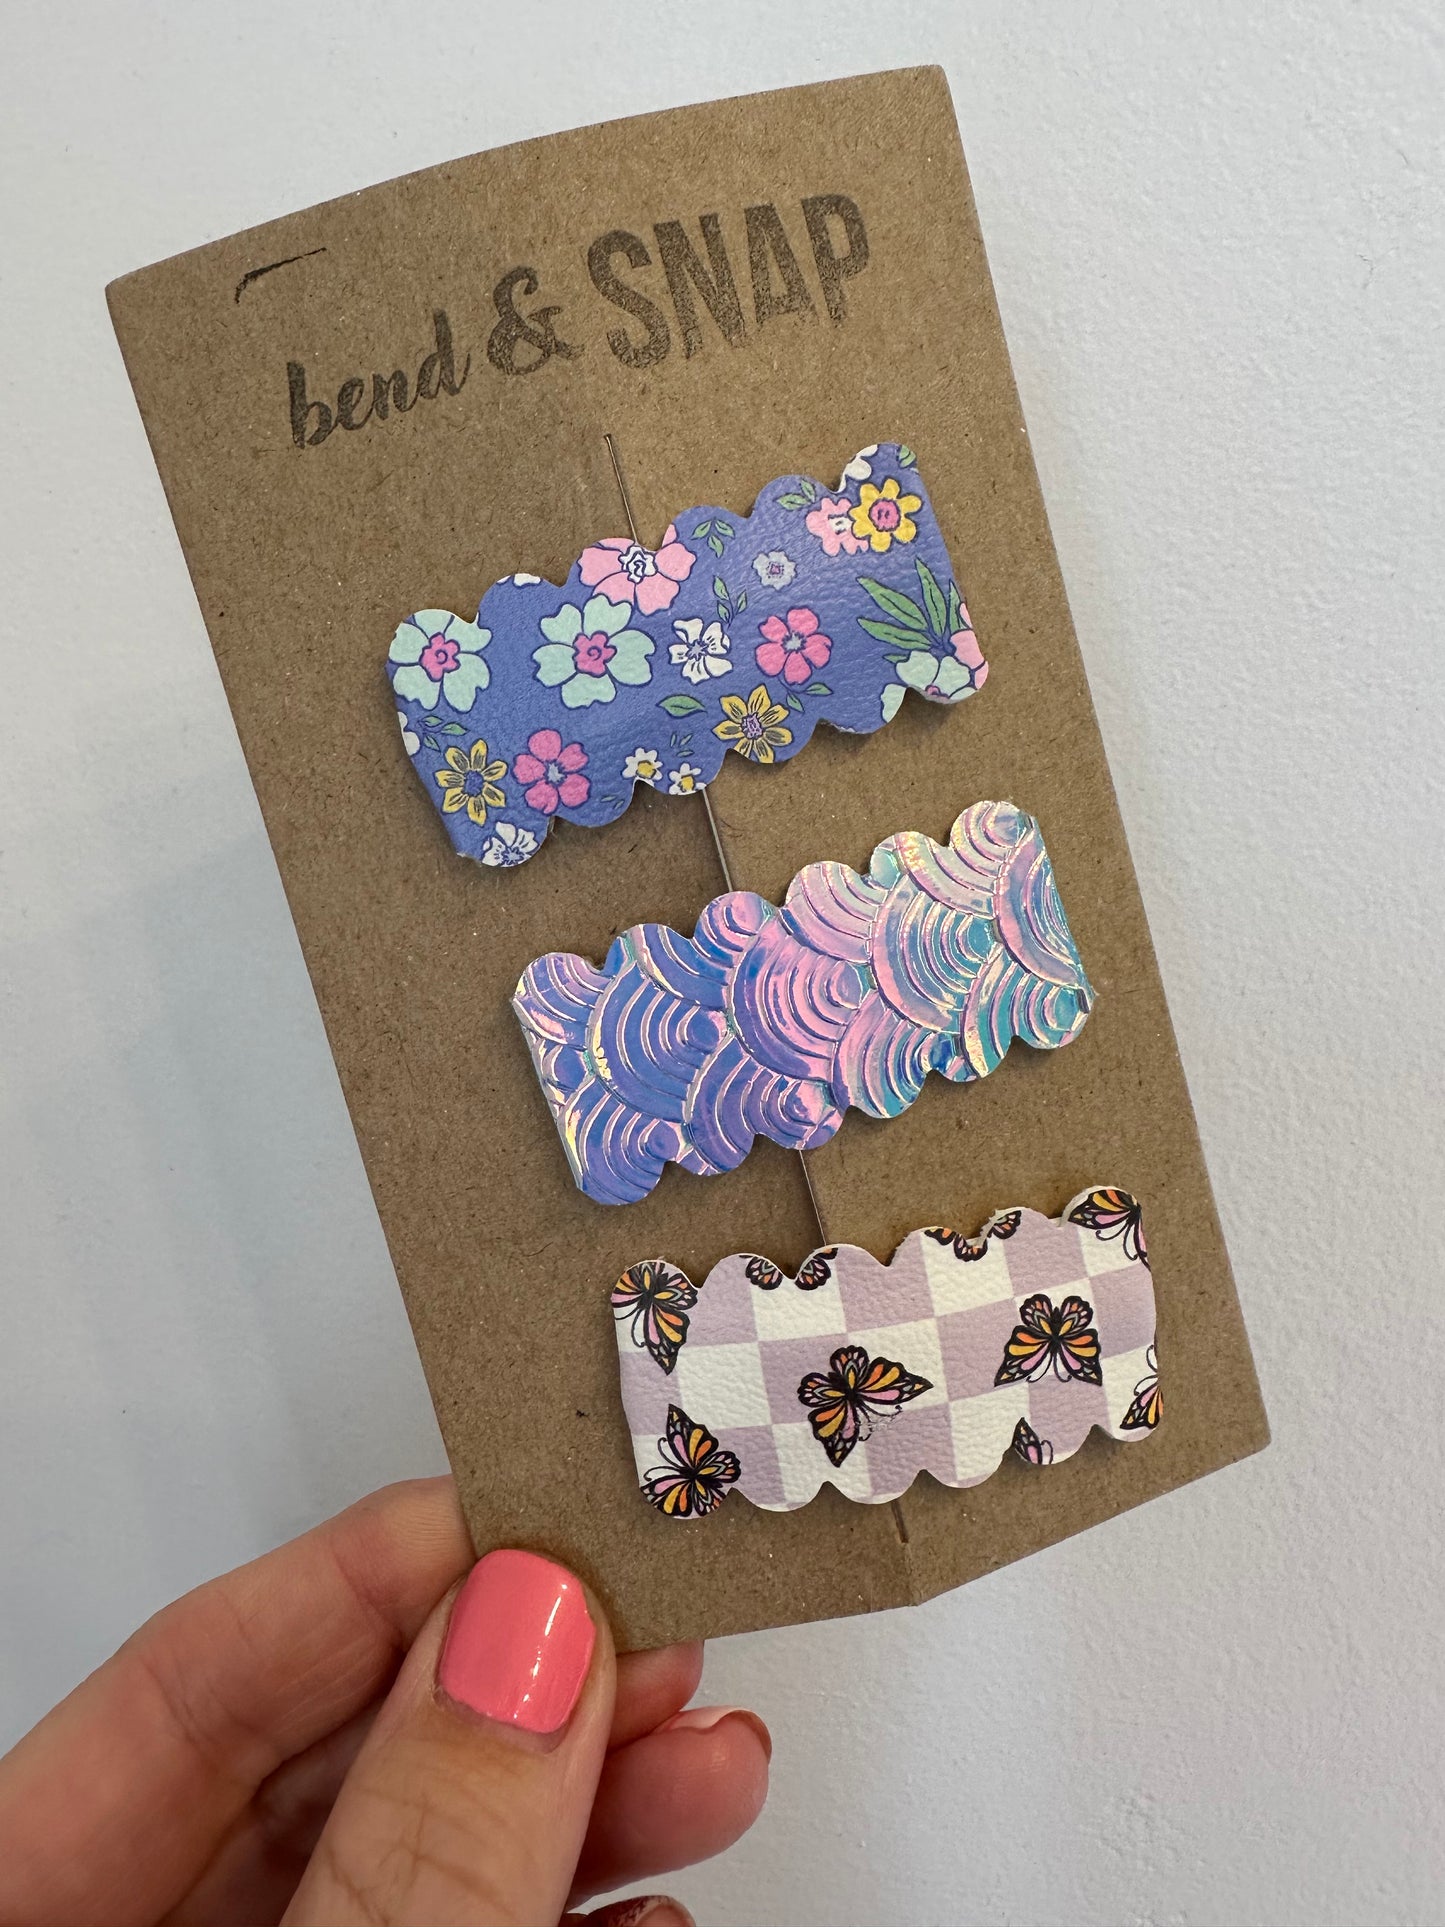 Bend & Snap 3 Pack Snap Clips